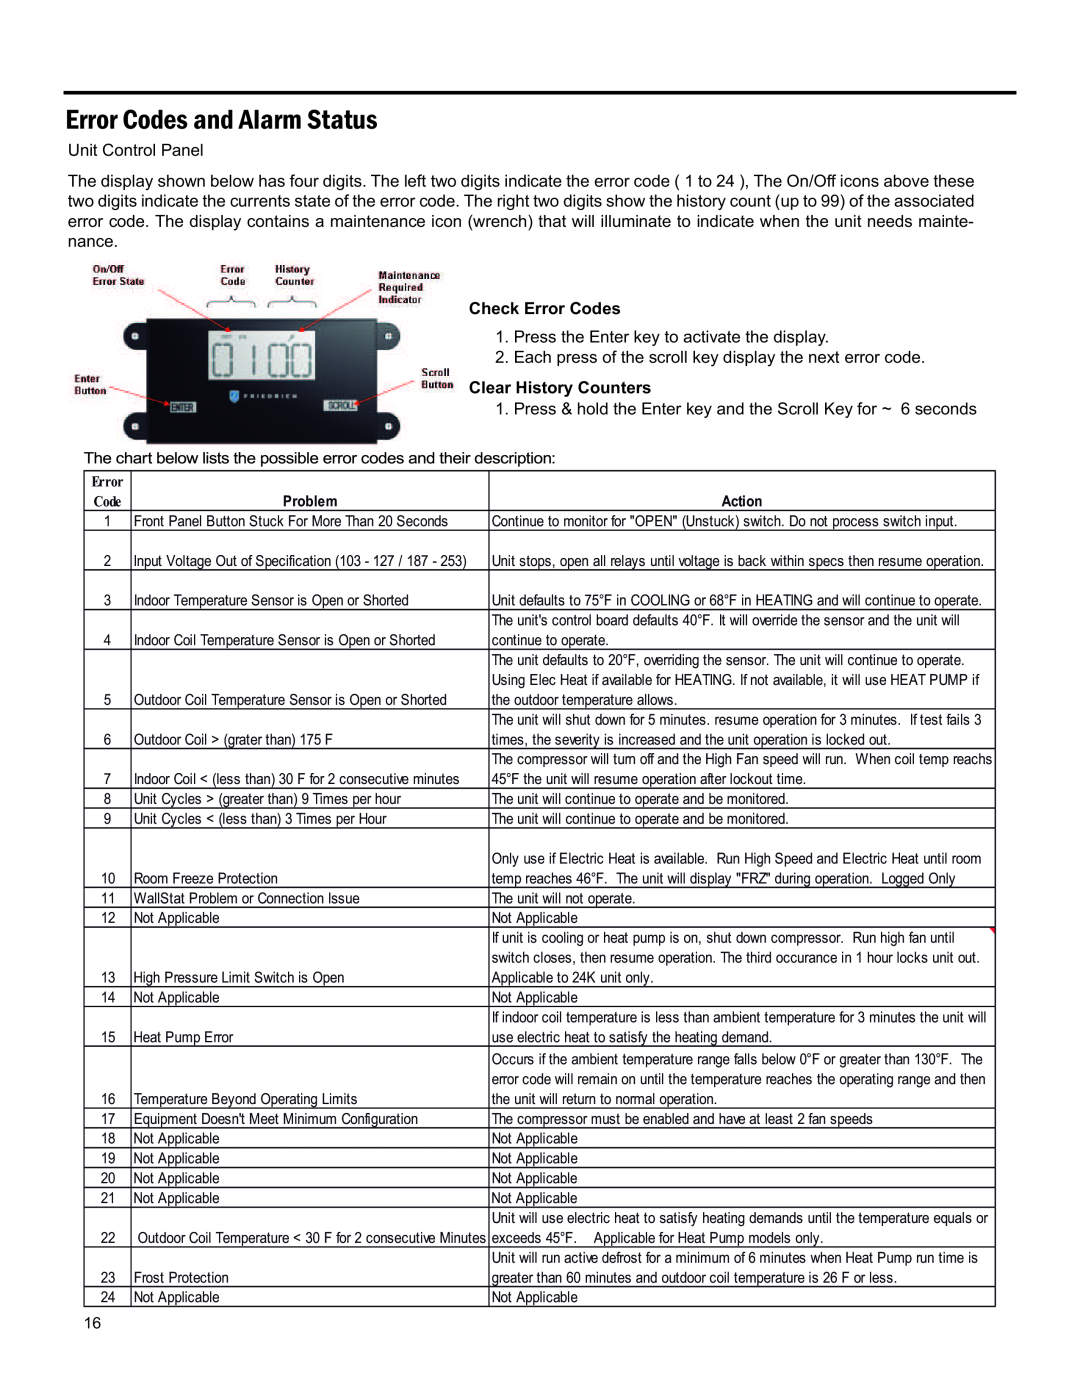 Friedrich 920-075-13 (1-11) Error Codes And Alarm Status, Unit Control Panel, Check Error Codes, Clear History Counters 